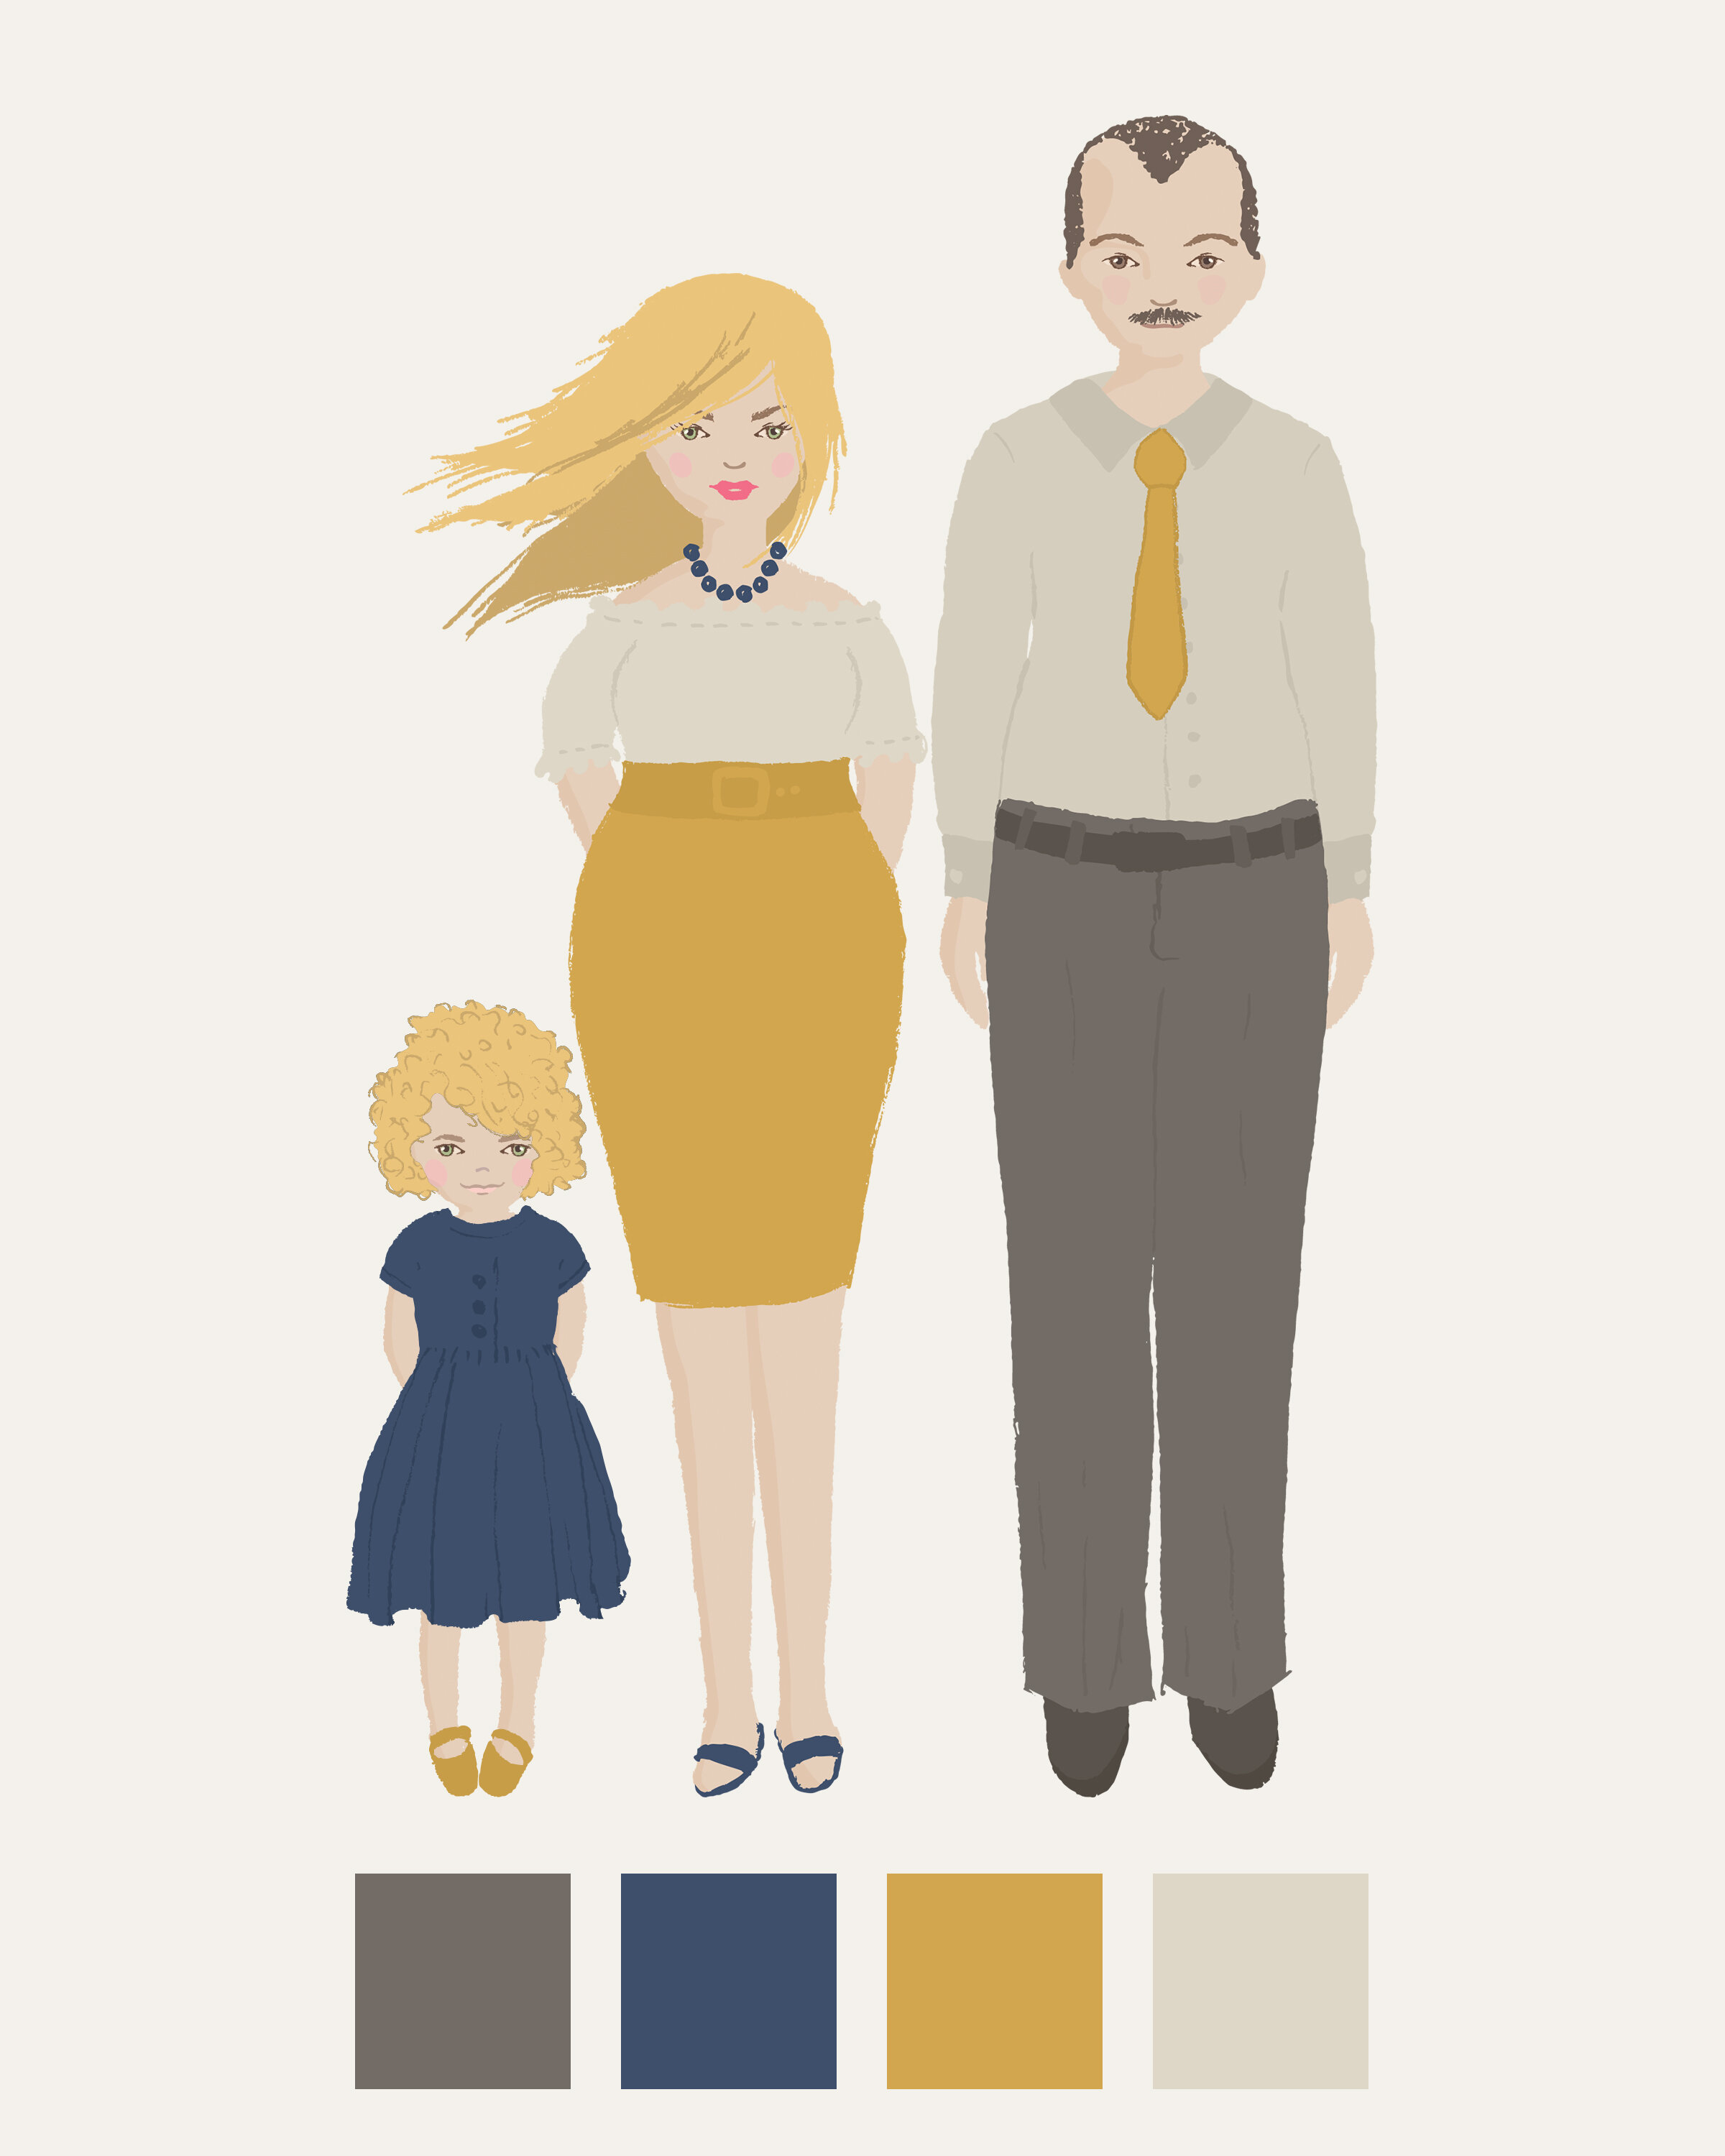 Family photo outfit ideas with color palette in gold, navy blue, taupe, and cream.